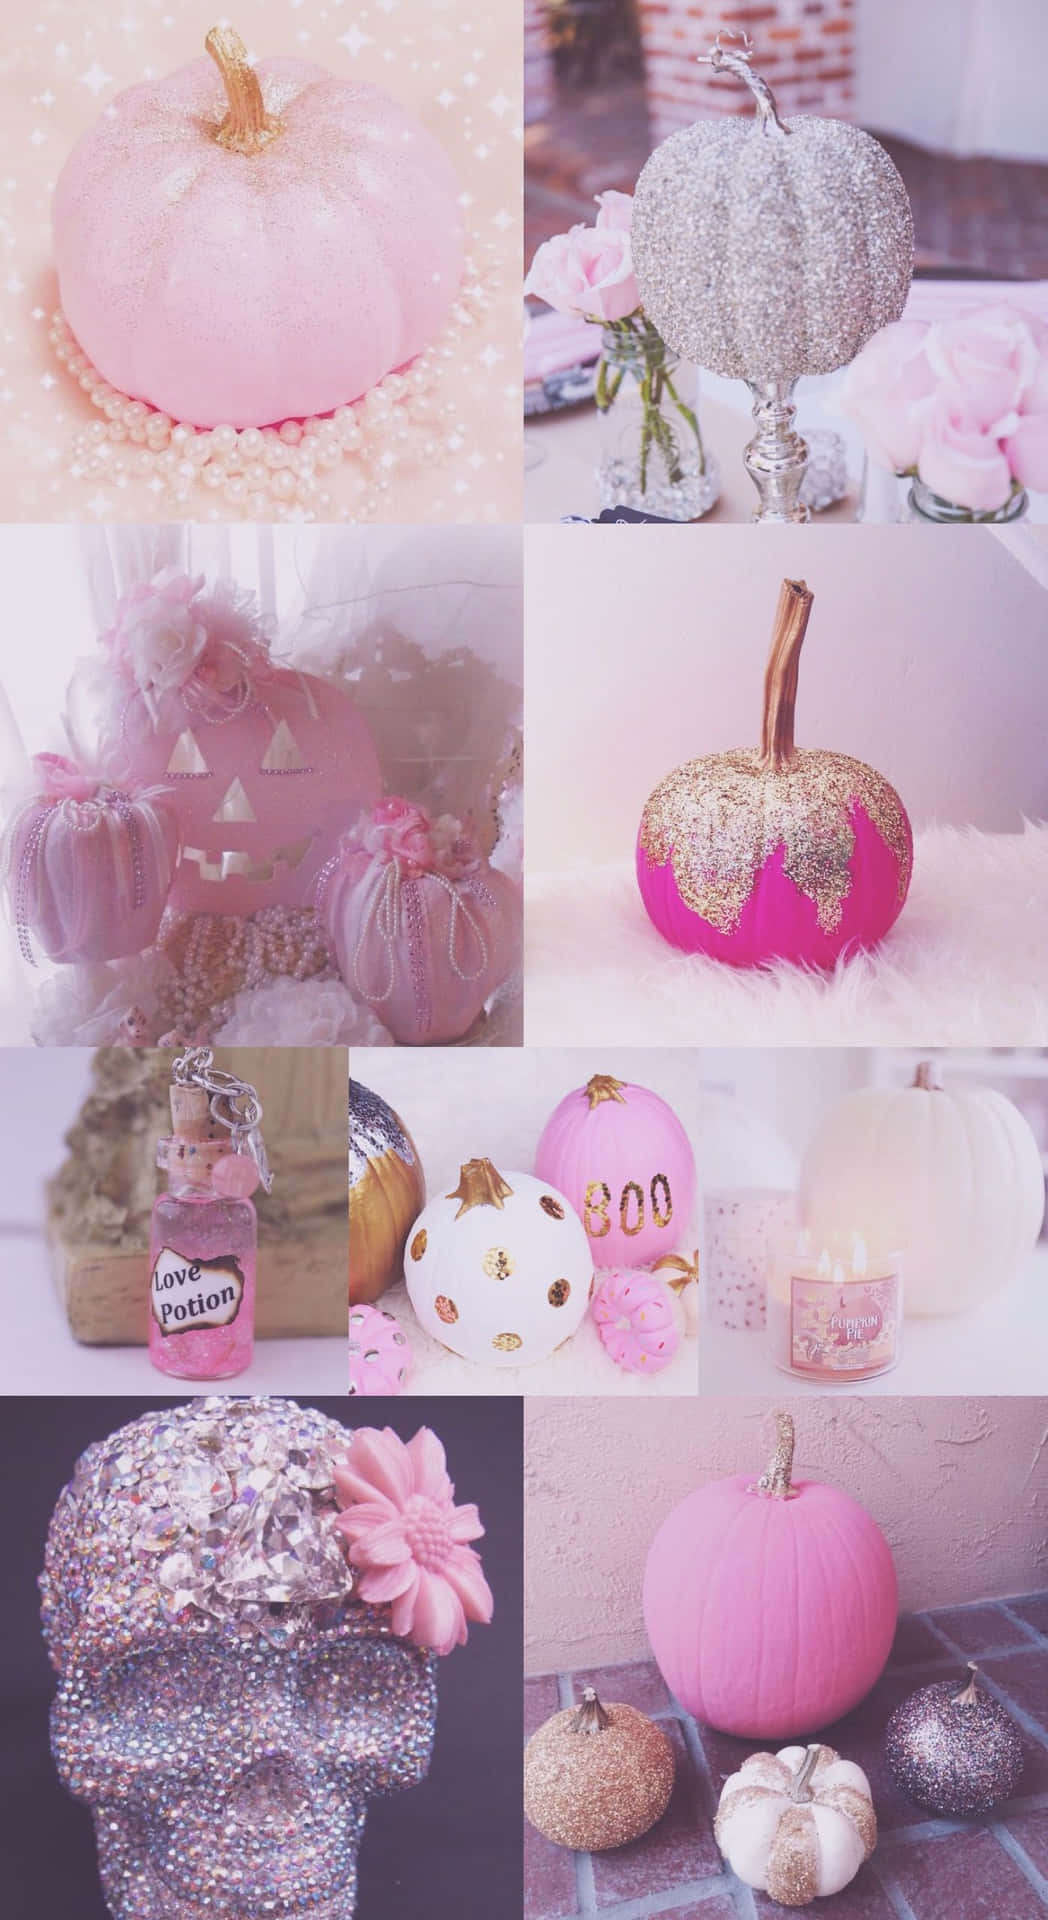 A beautiful pink pumpkin perfect for decoration or a Halloween display. Wallpaper